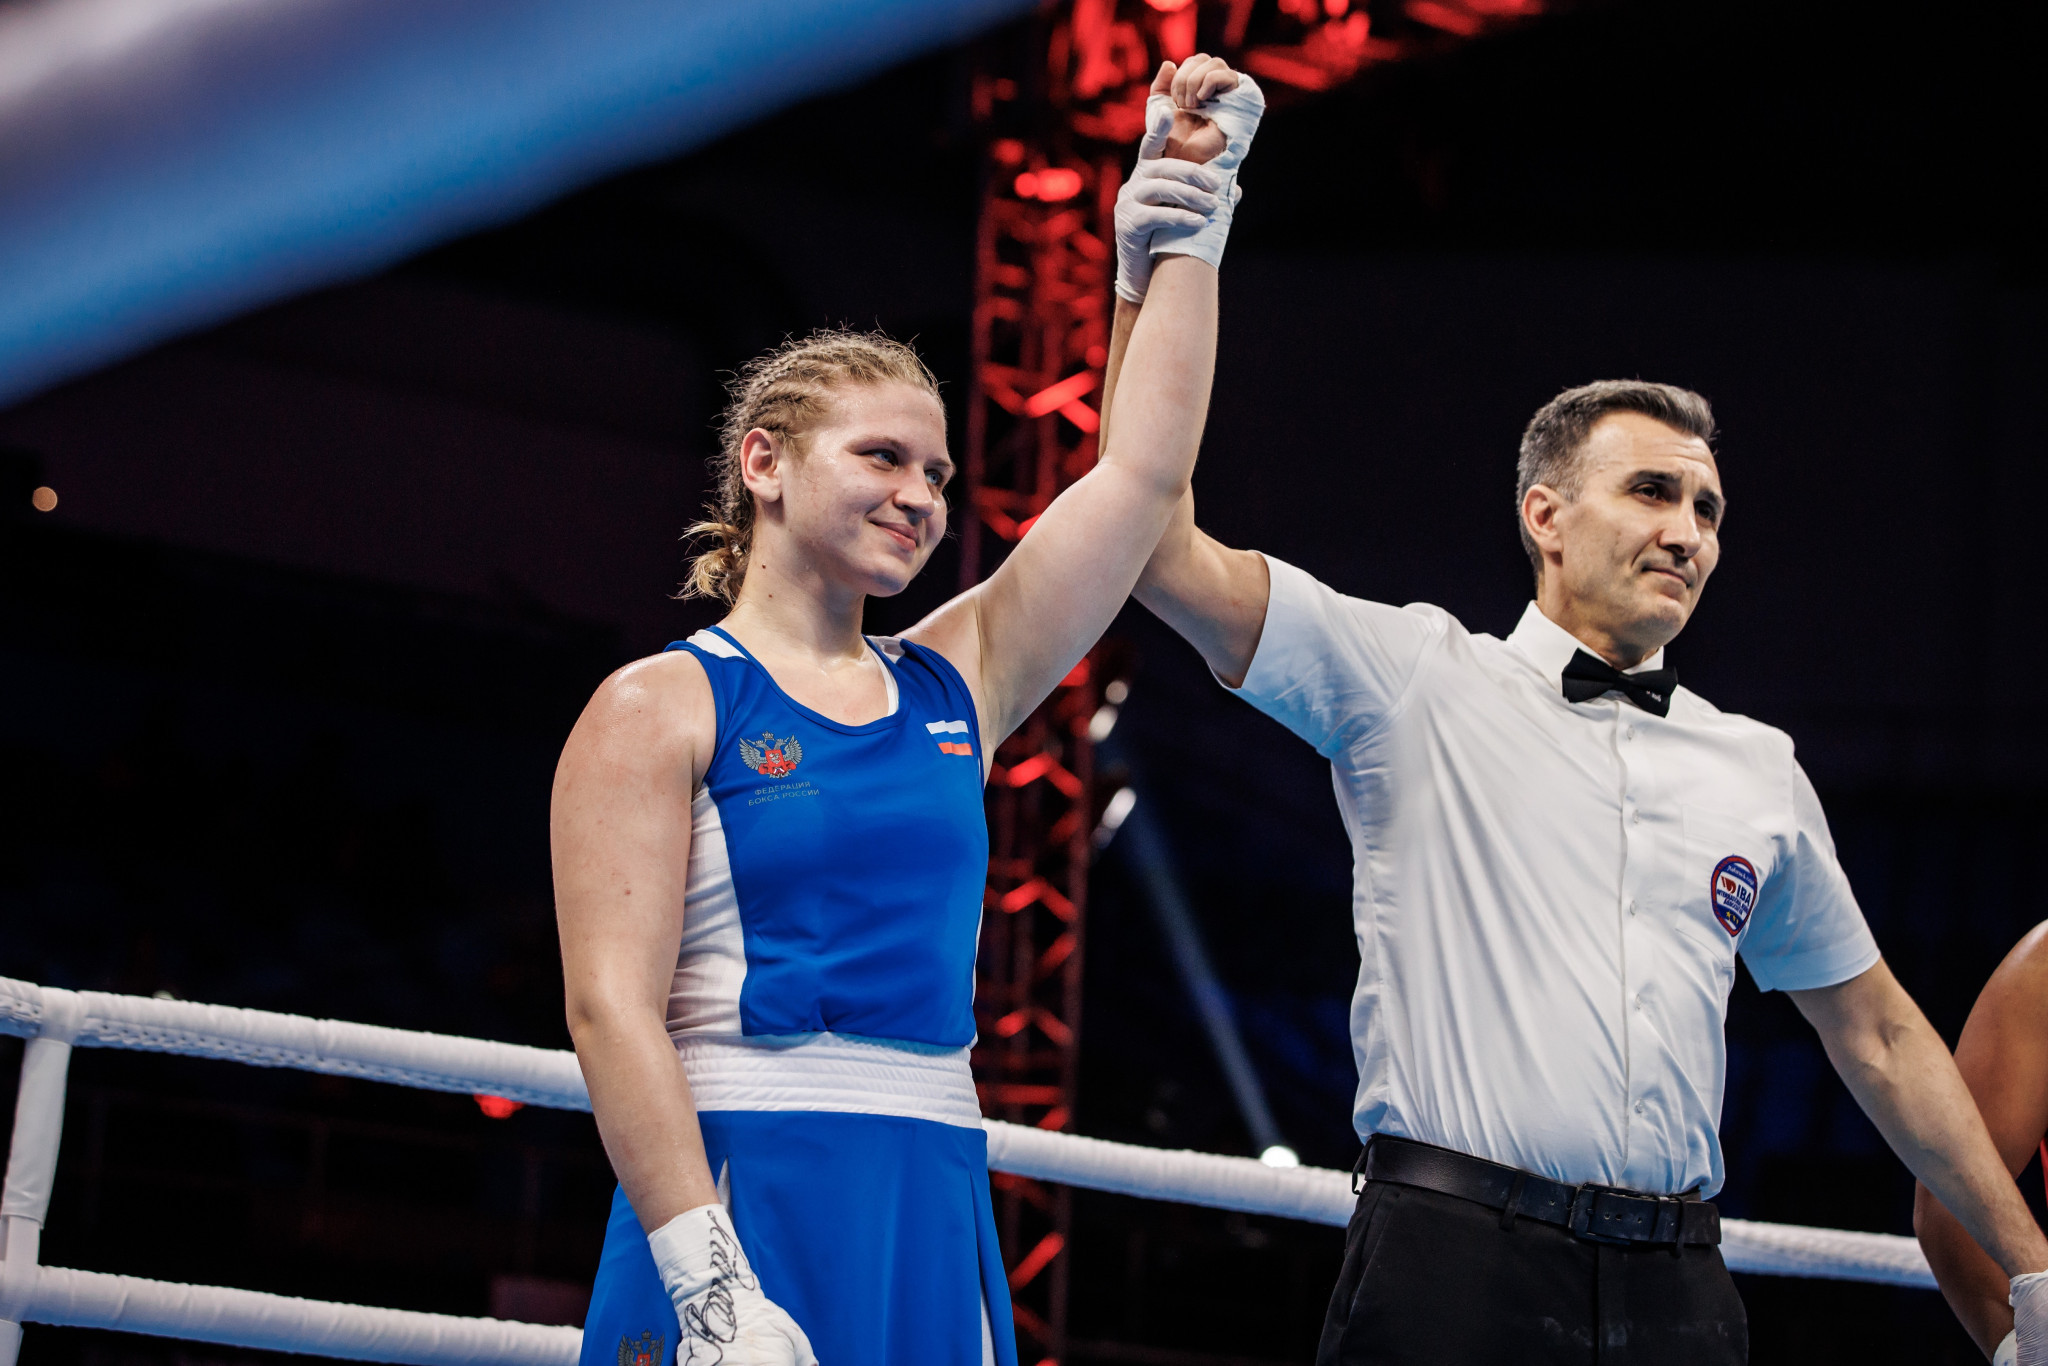 Anastasiia Shamonova is among the Russian boxers that will be aiming to compete at next year's Olympics in Paris ©IBA